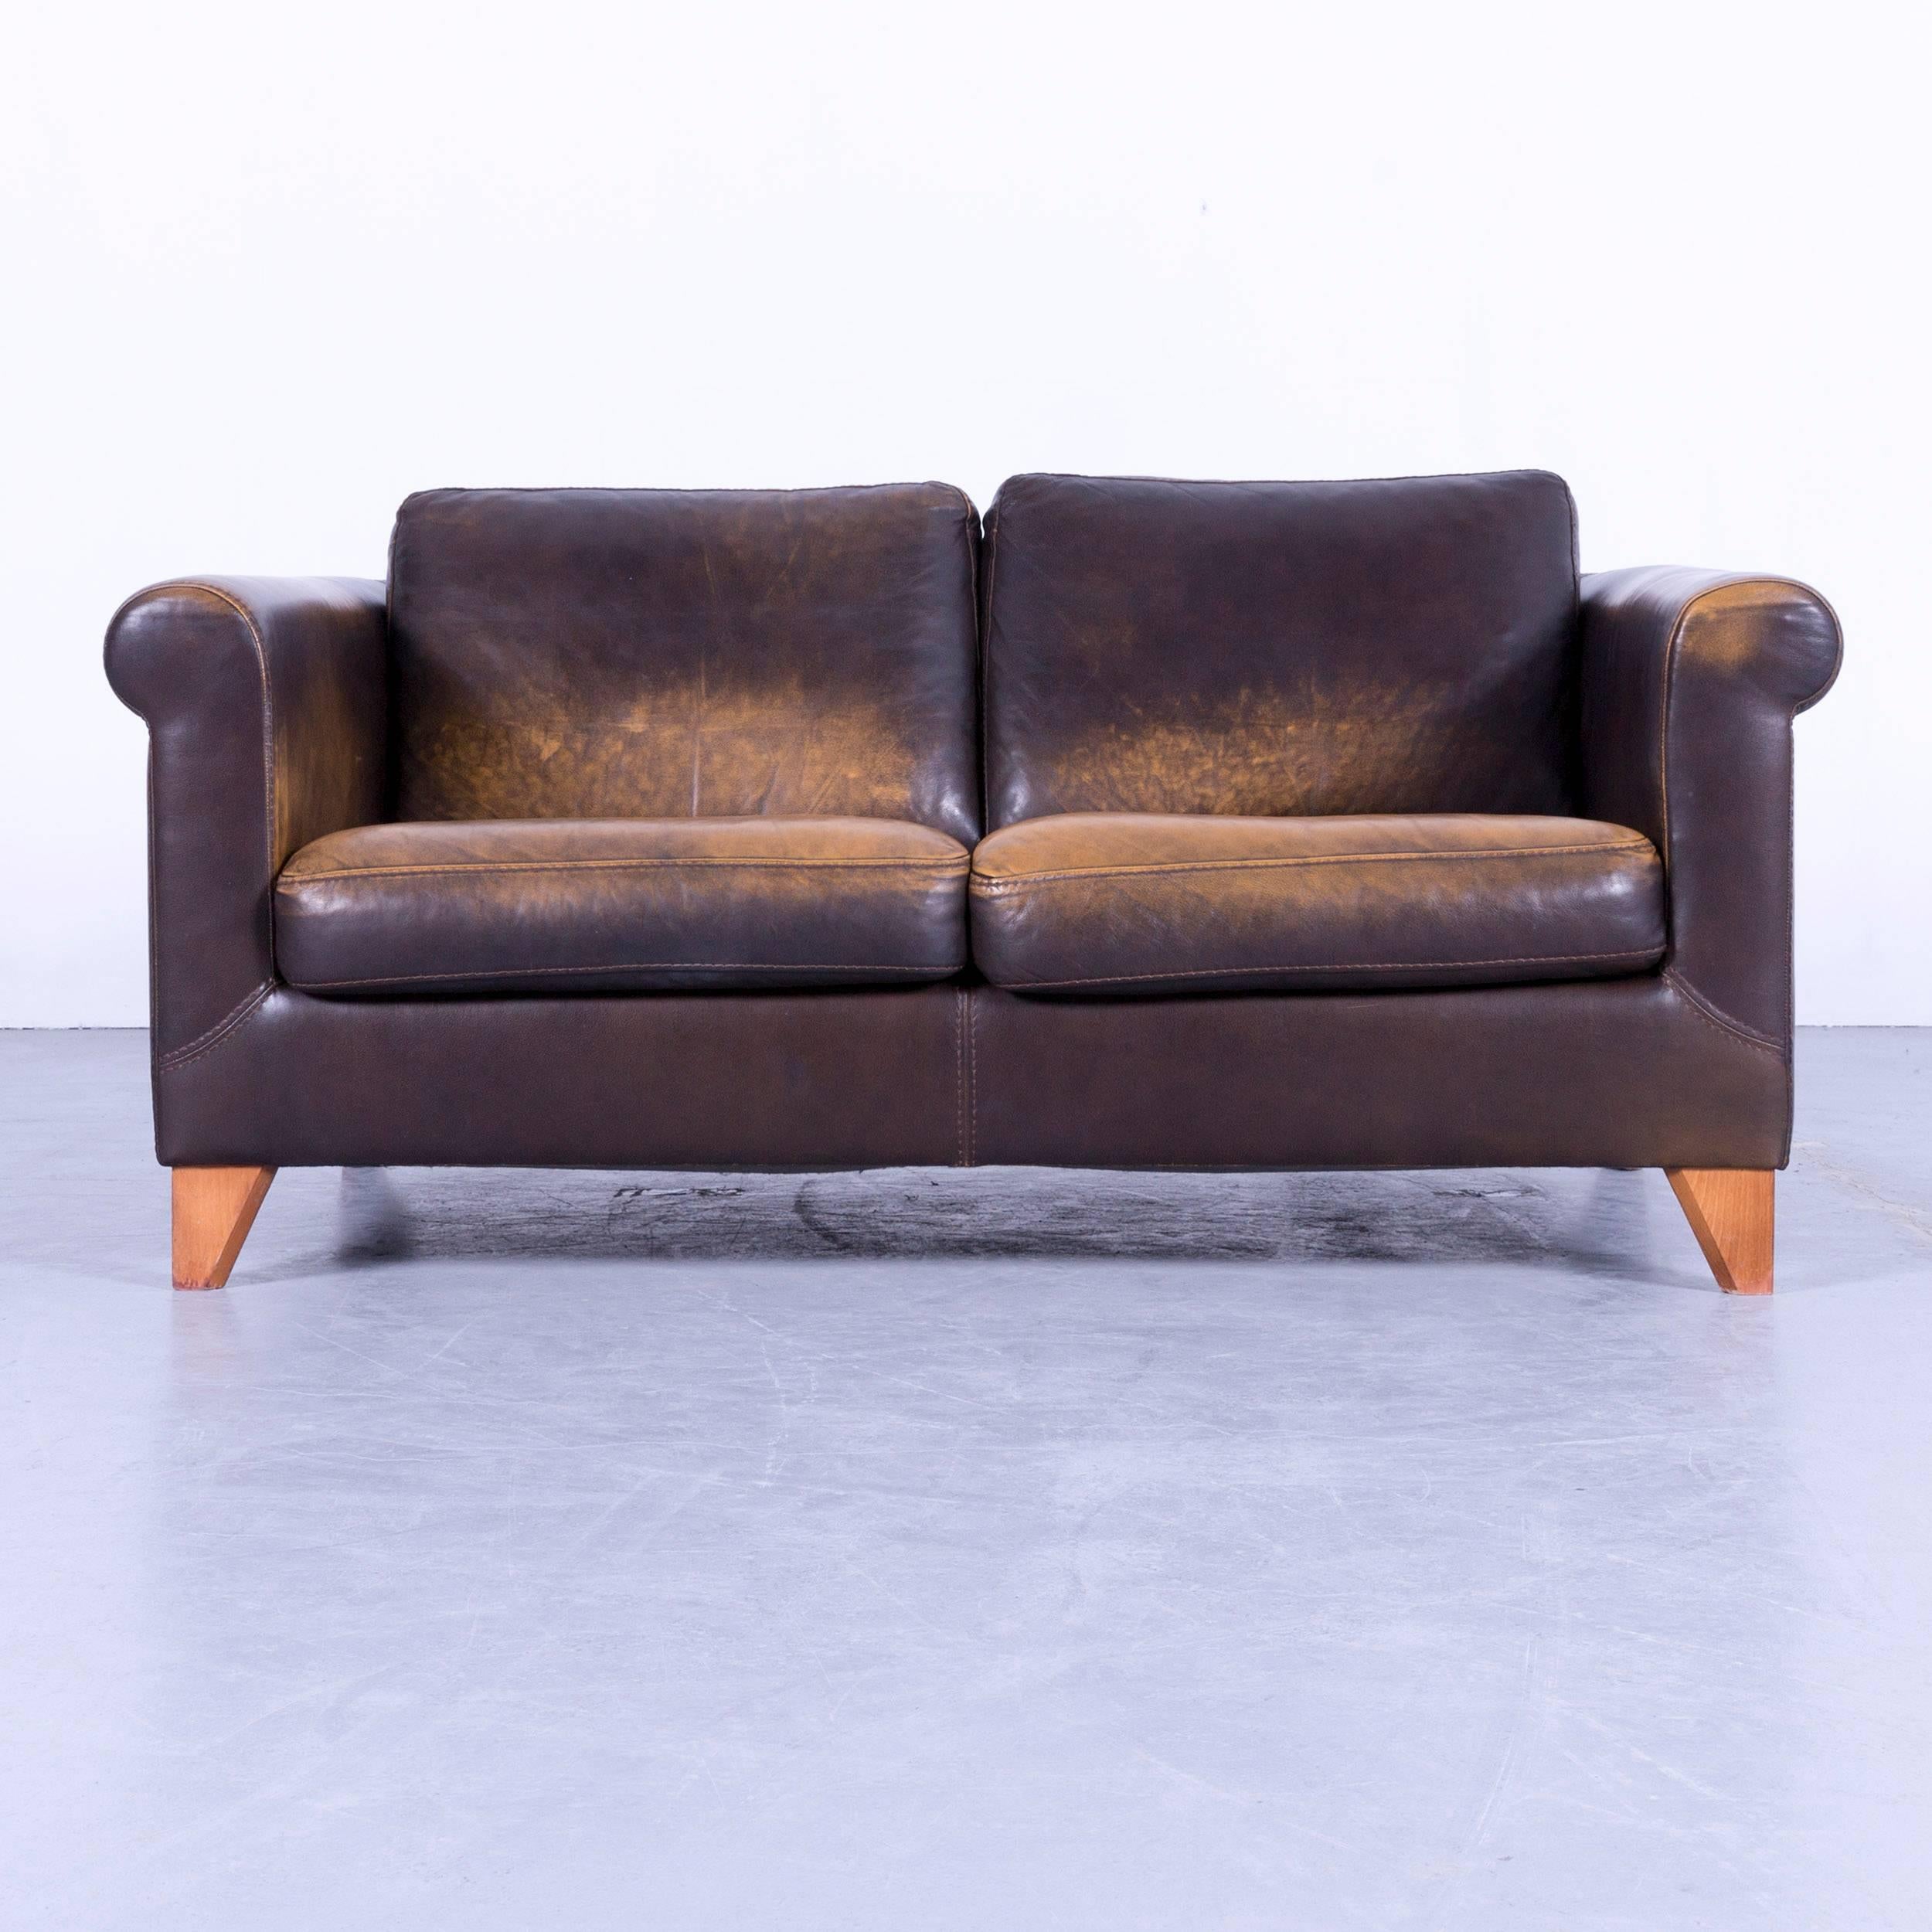 Machalke designer two-seat sofa set and armchair Leather Brown made for pure comfort and flexibility.